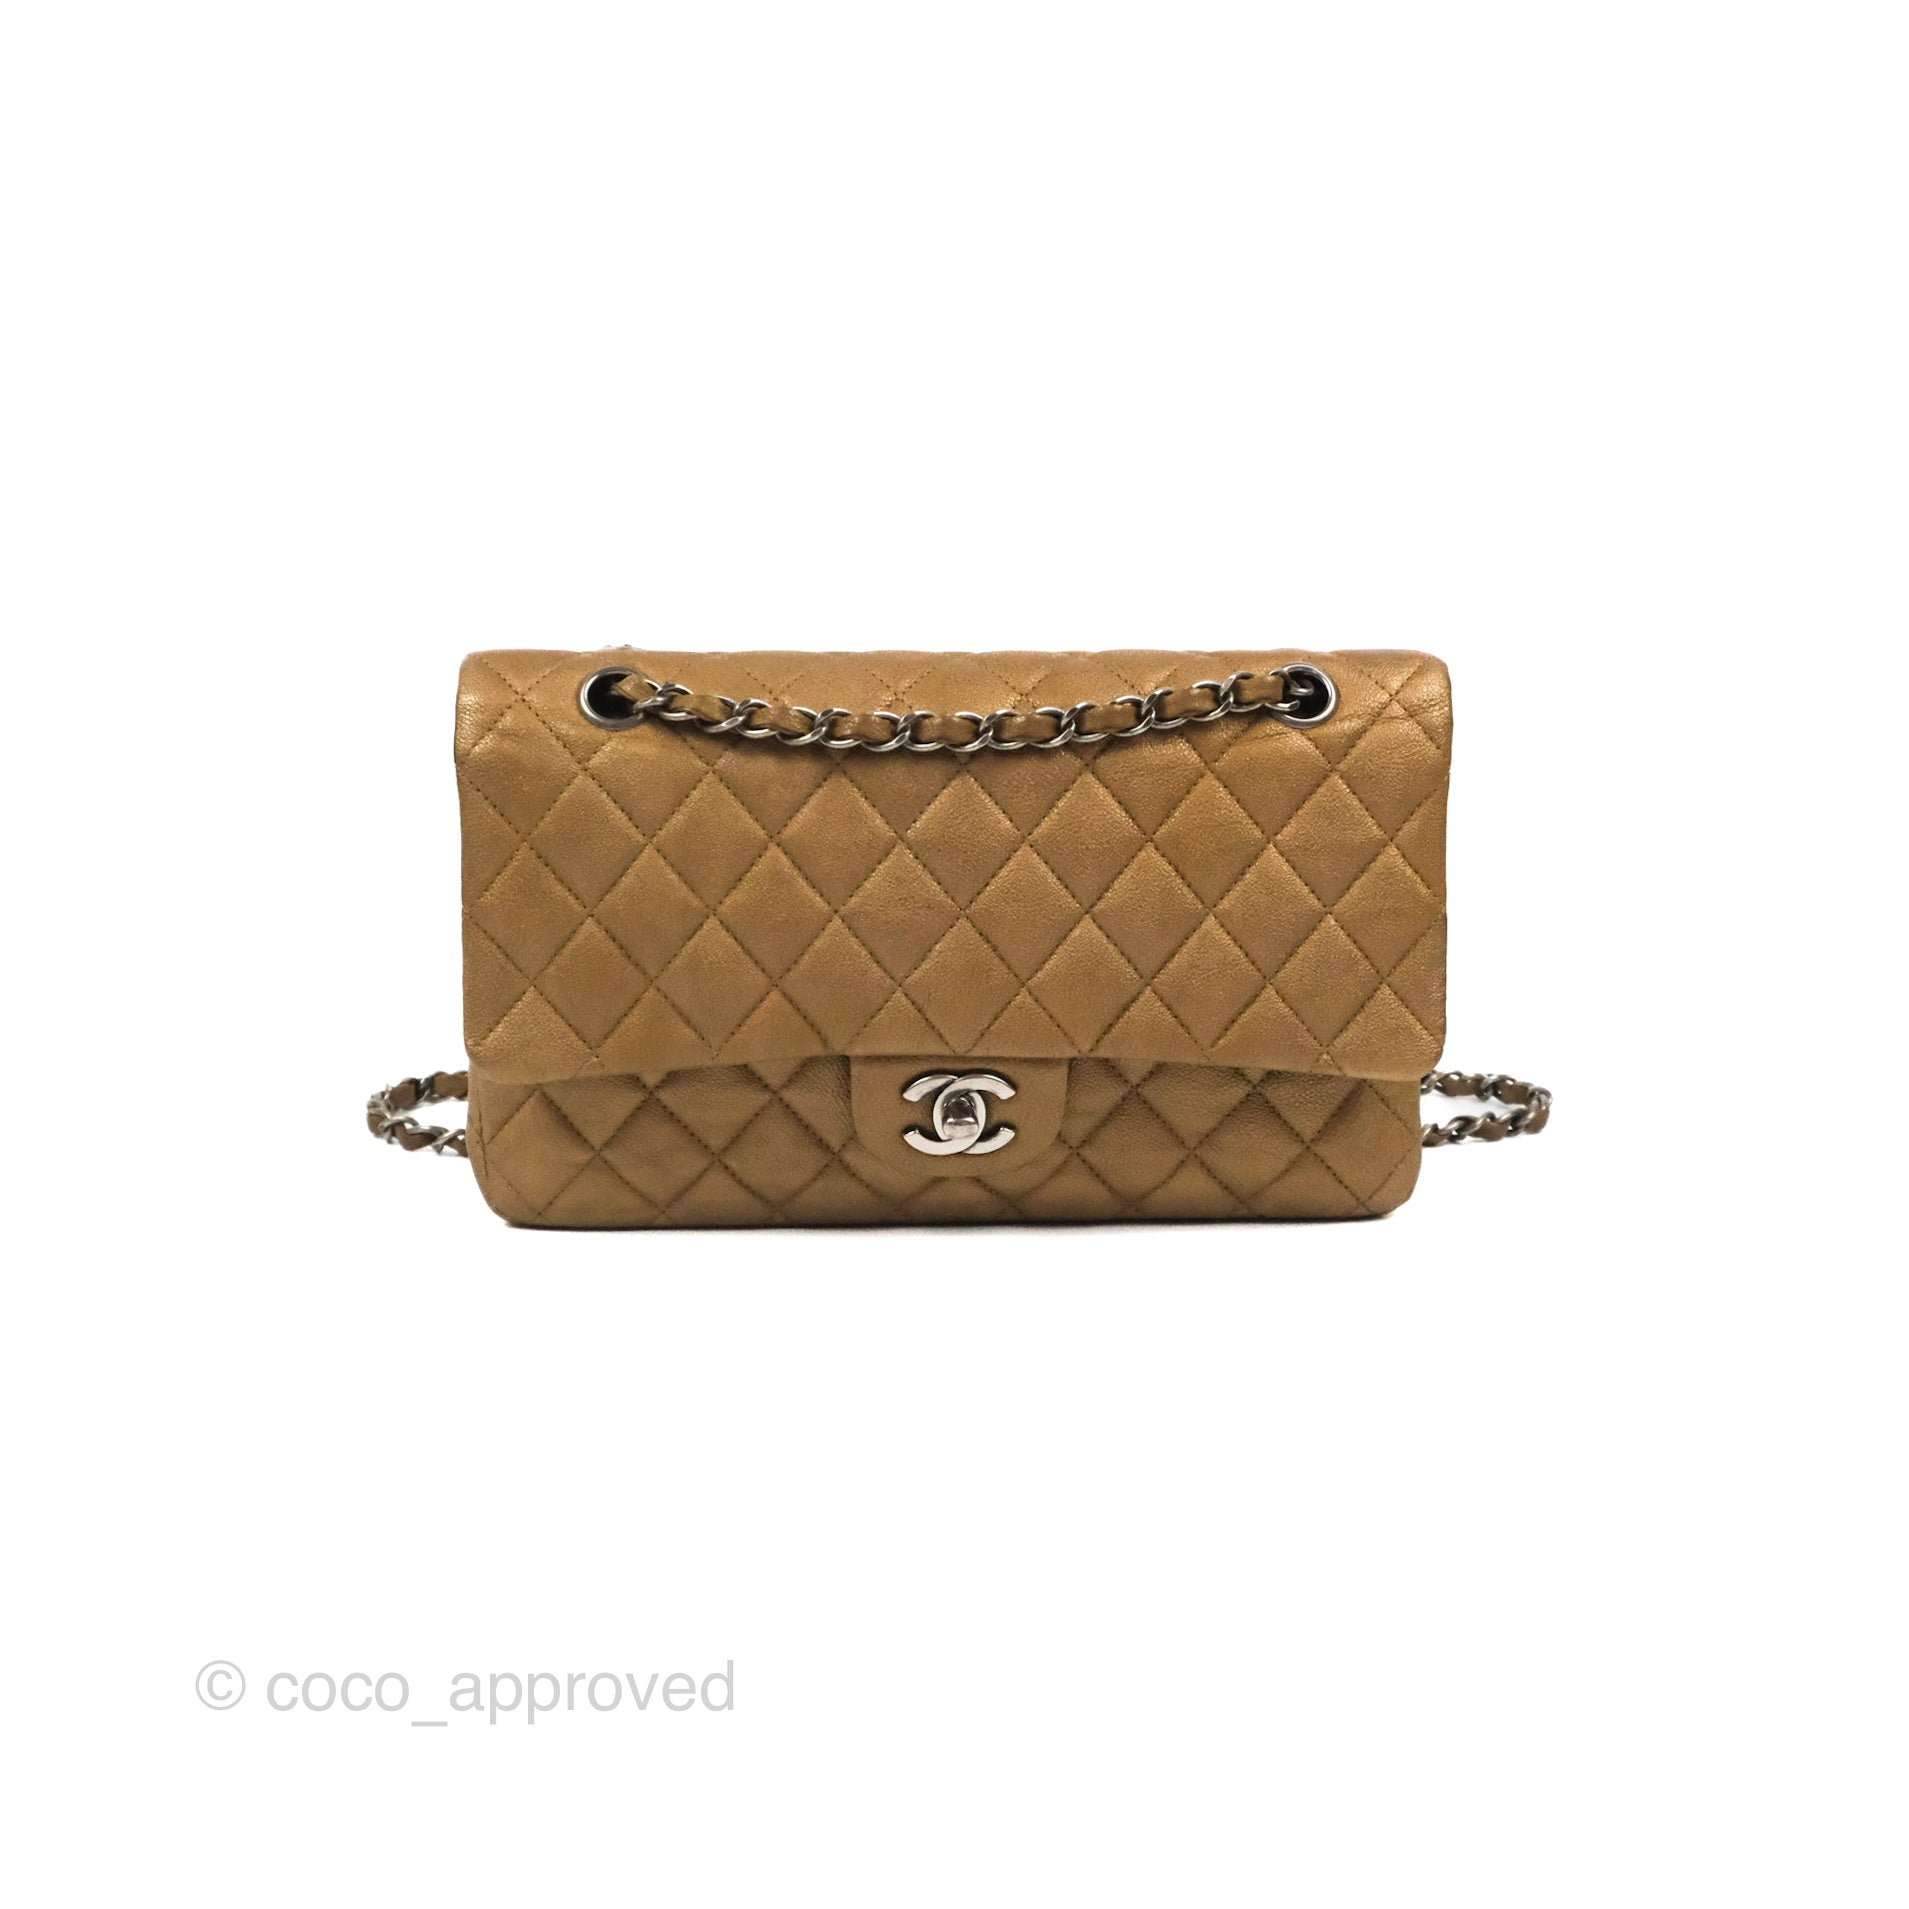 Chanel Classic Medium Flap Quilted Metallic Gold Grained Calfskin